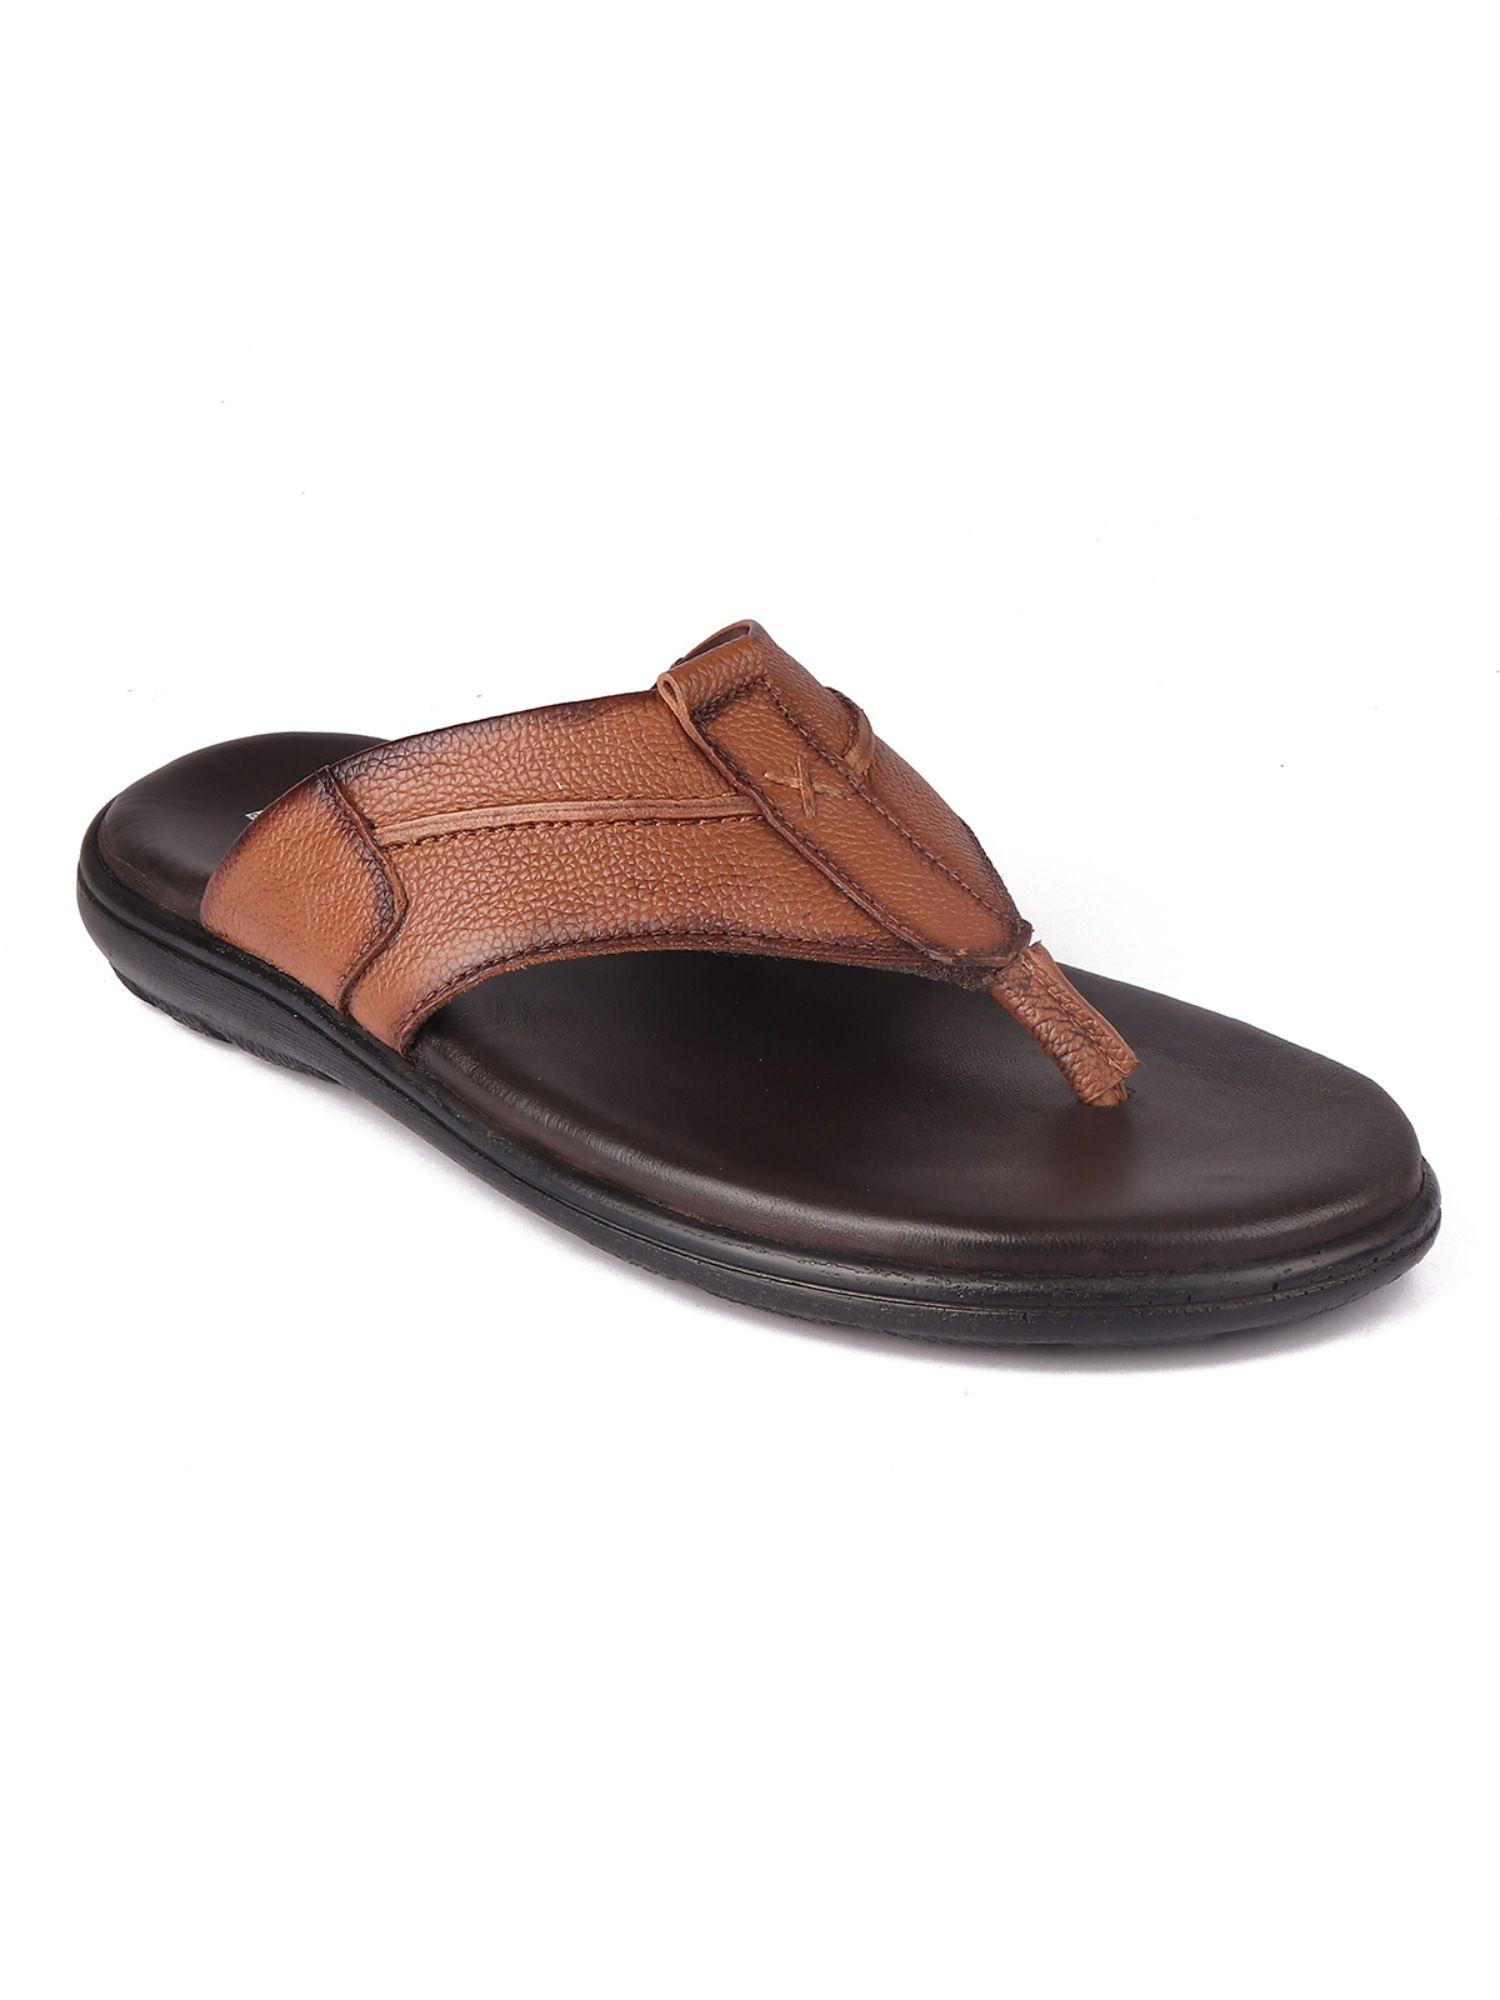 tan-leather-casual-solid-thong-slipper-for-men